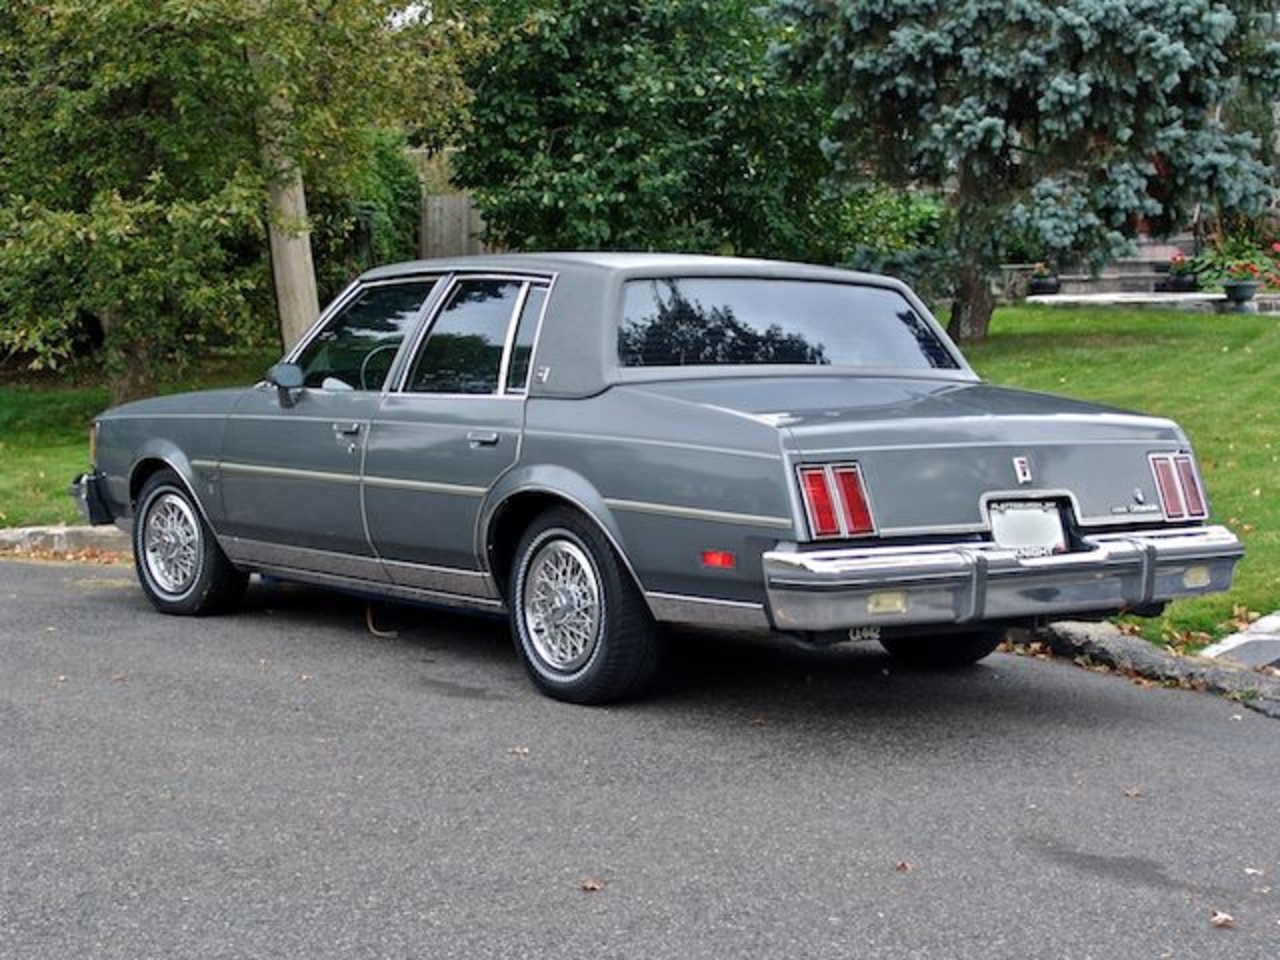 GM_FORD_GUY's 1987 Oldsmobile Cutlass Brougham. info and pics to come ...